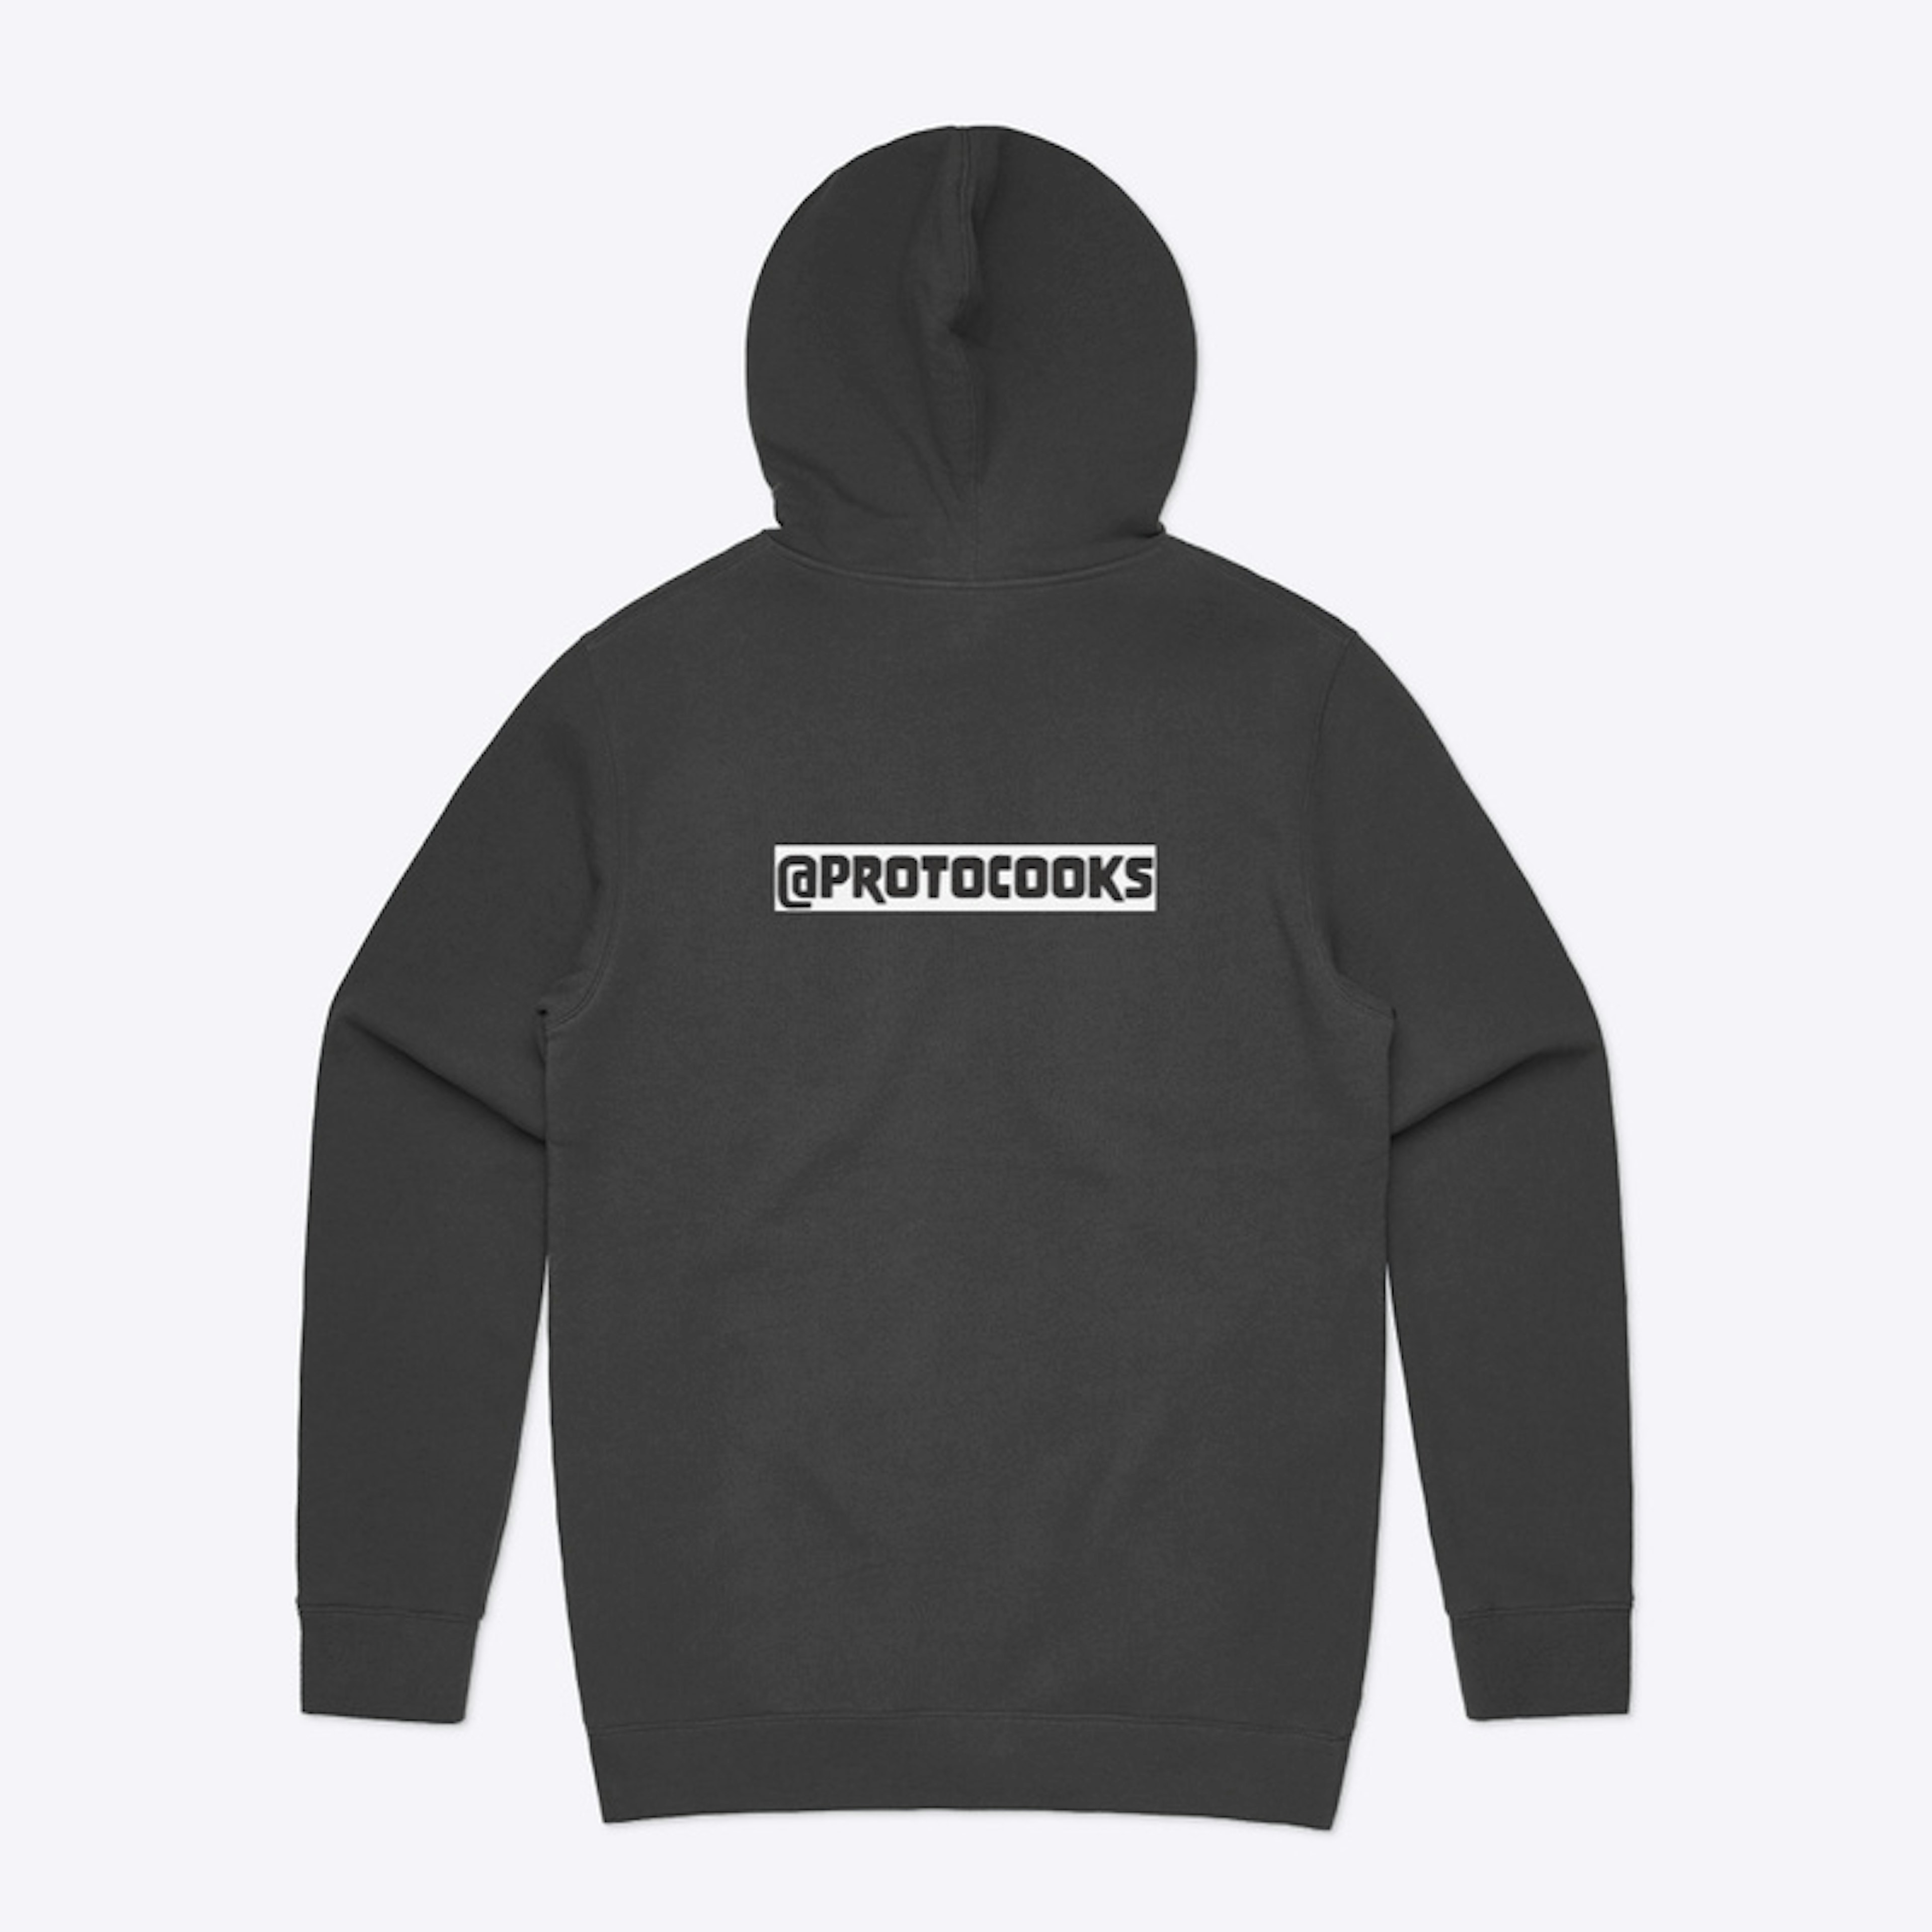 Salty Merchandise from protocooks